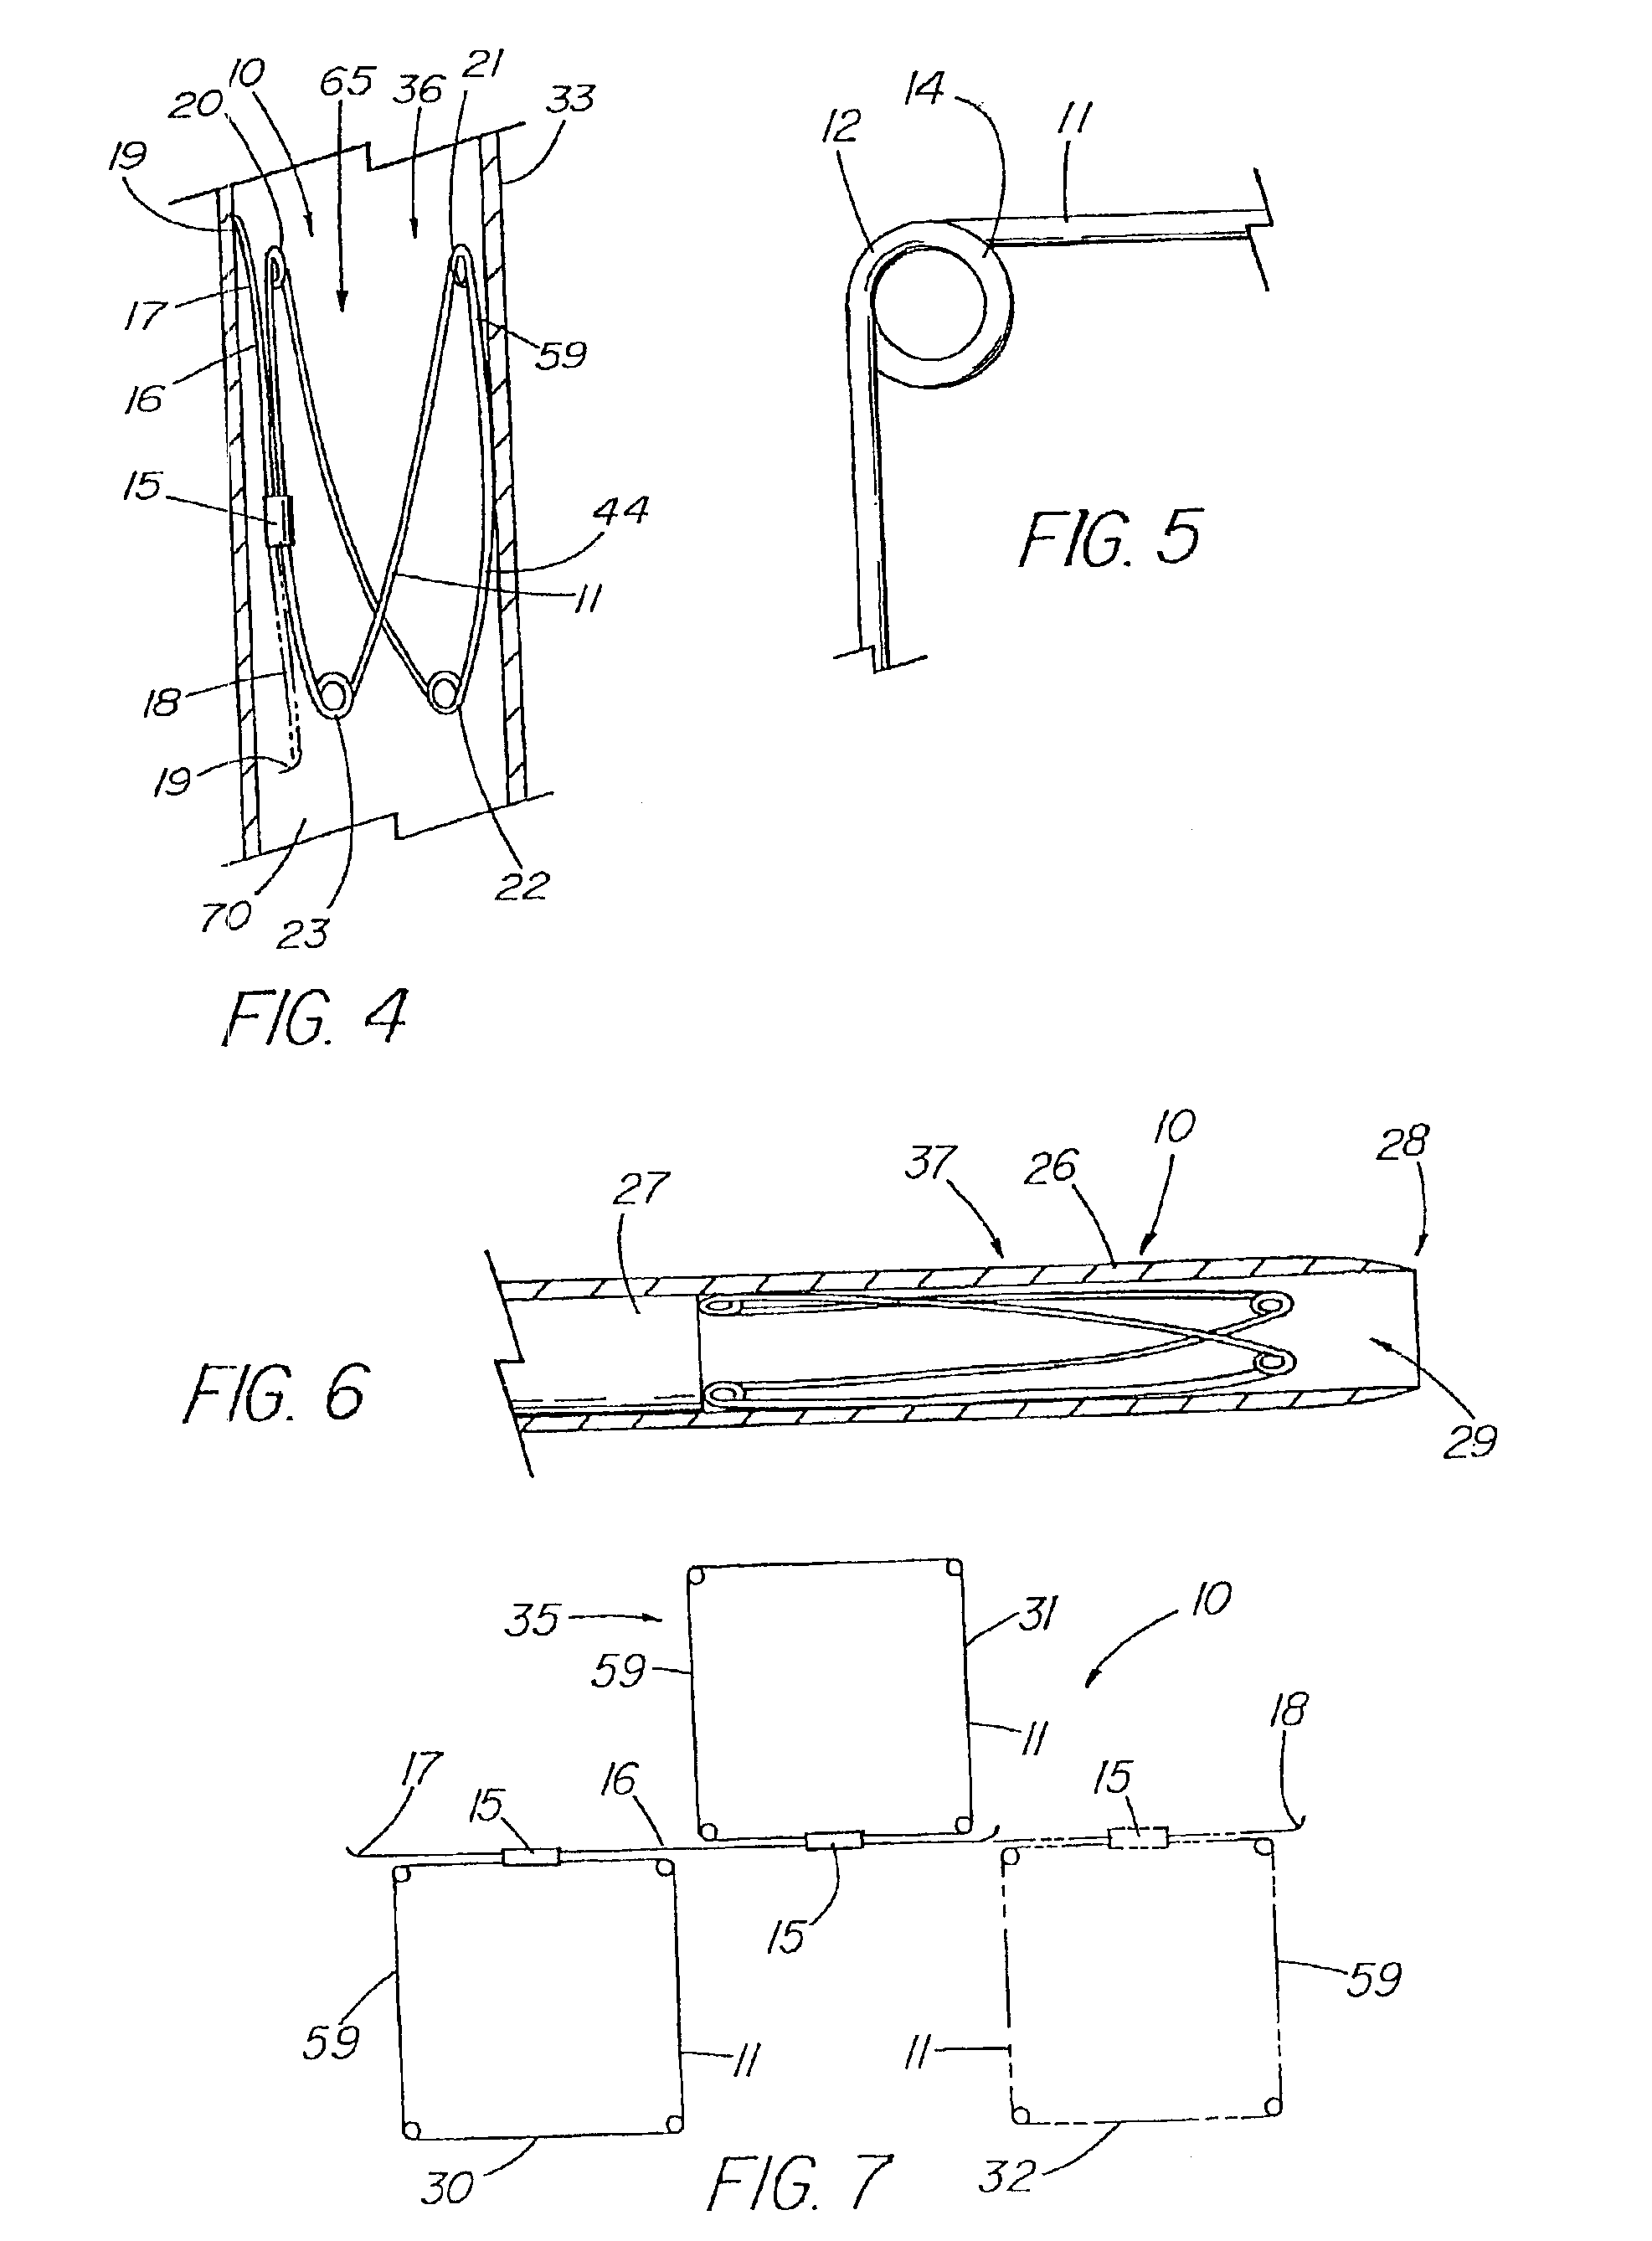 Multiple-sided intraluminal medical device